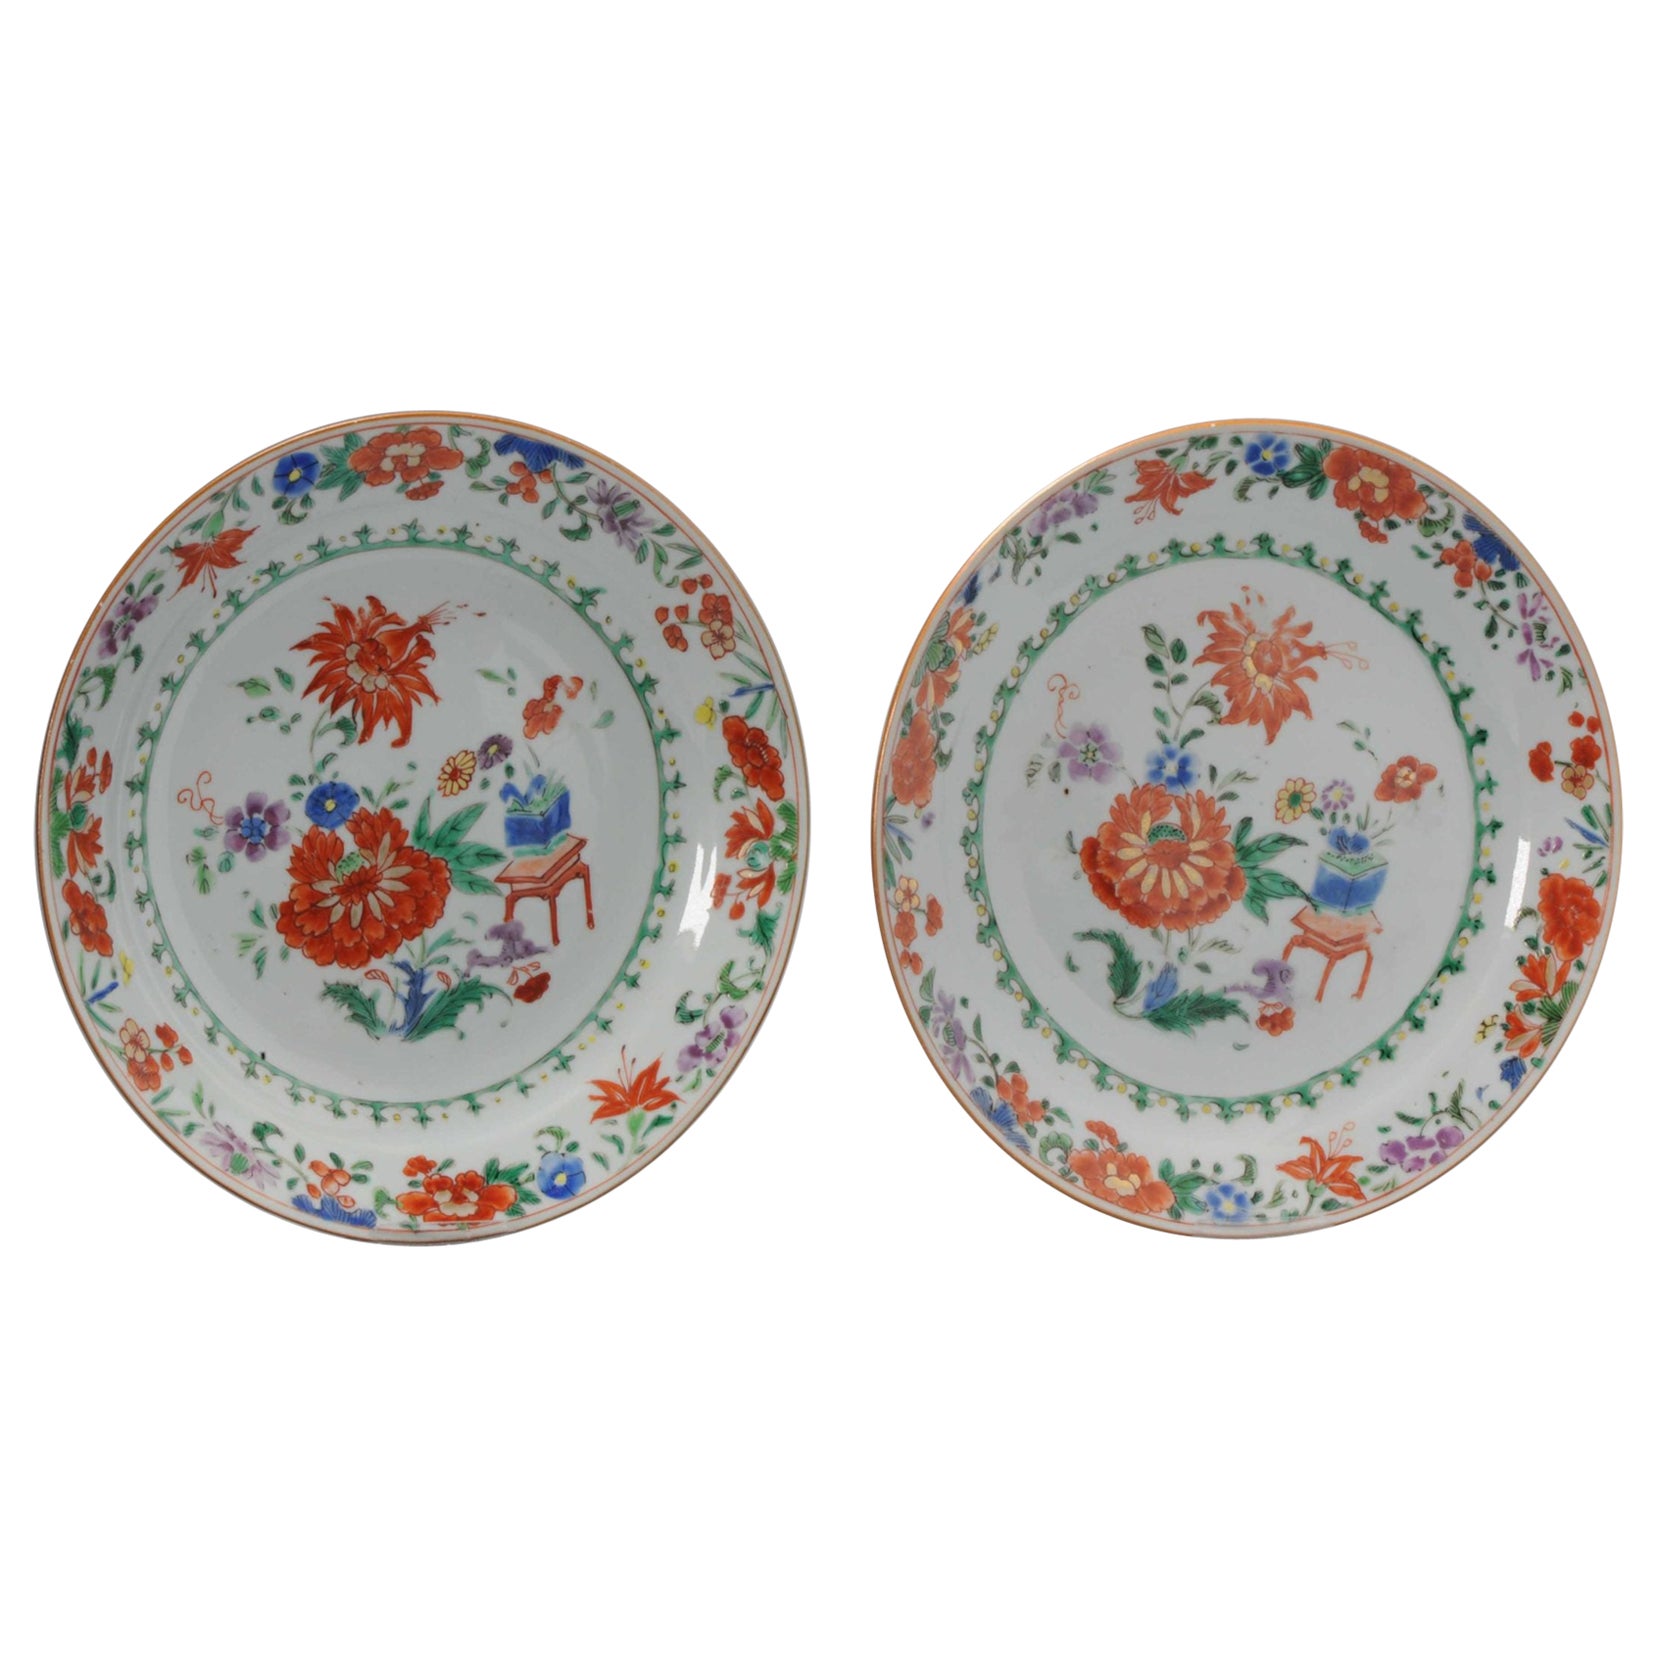 Antique Porcelain Pre Bencharong Fencai Plates with Flowers Green, 18/19th Cen For Sale